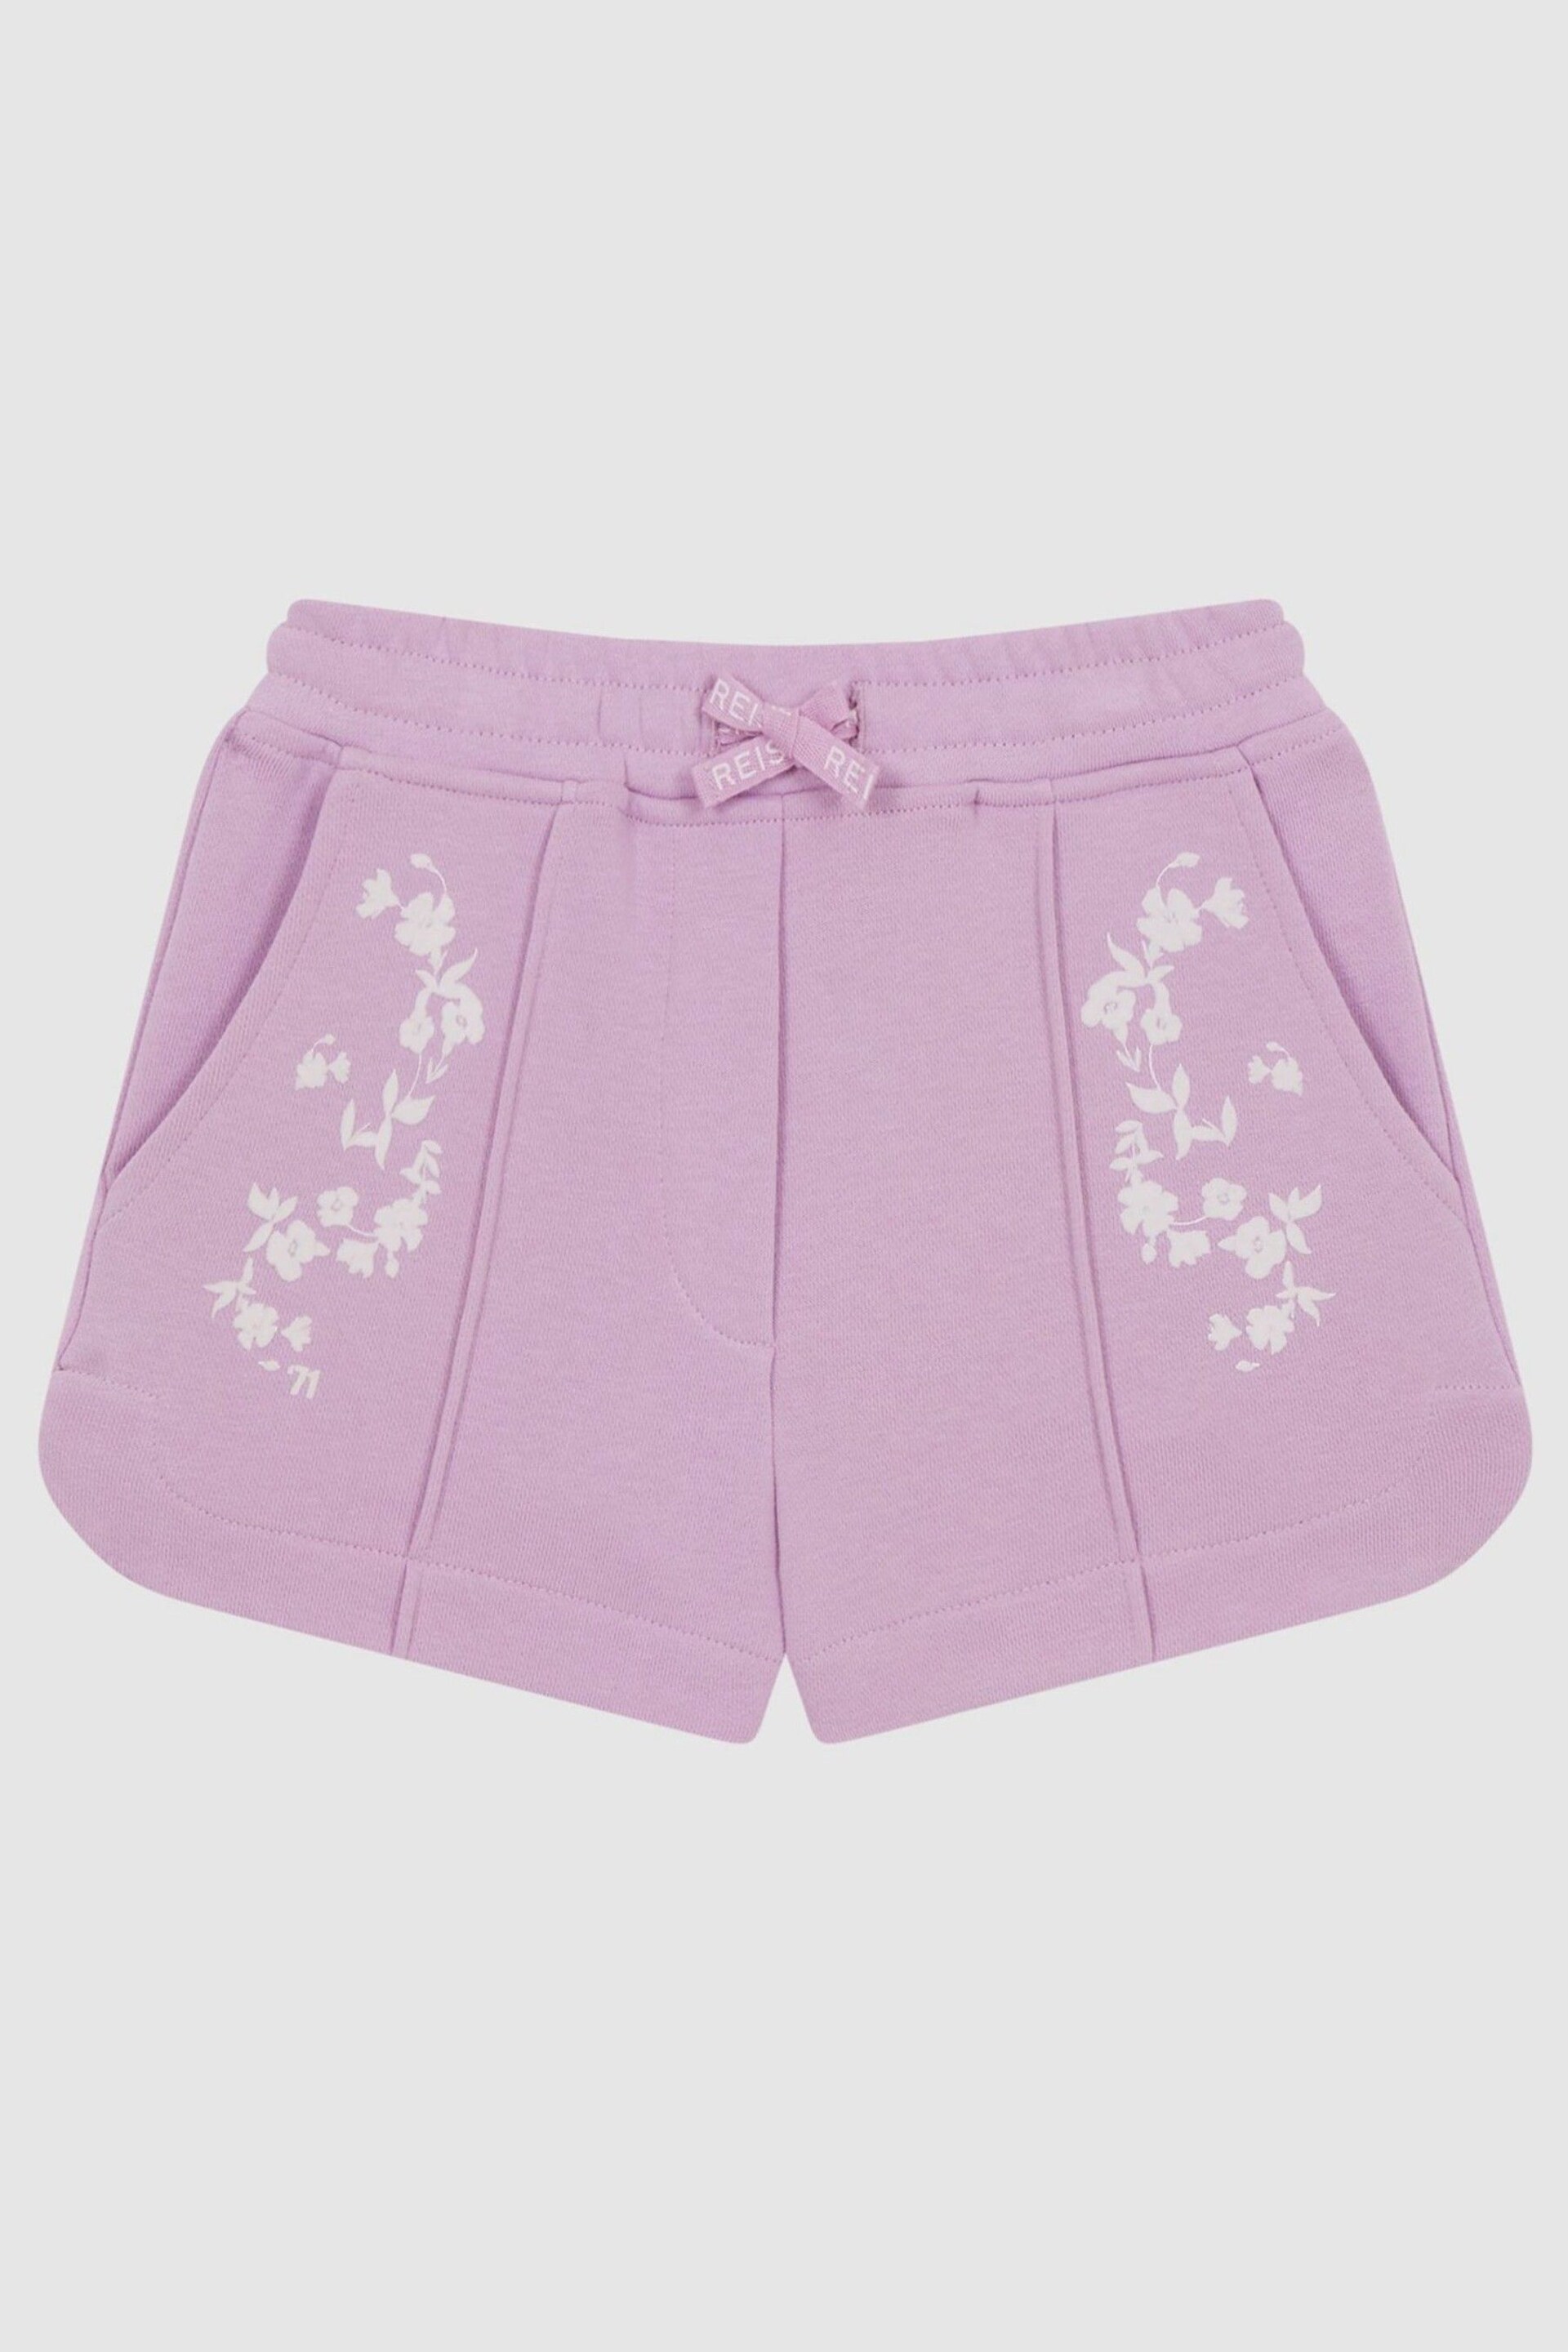 Reiss Lilac Honor Junior Jersey Logo Shorts - Image 2 of 6